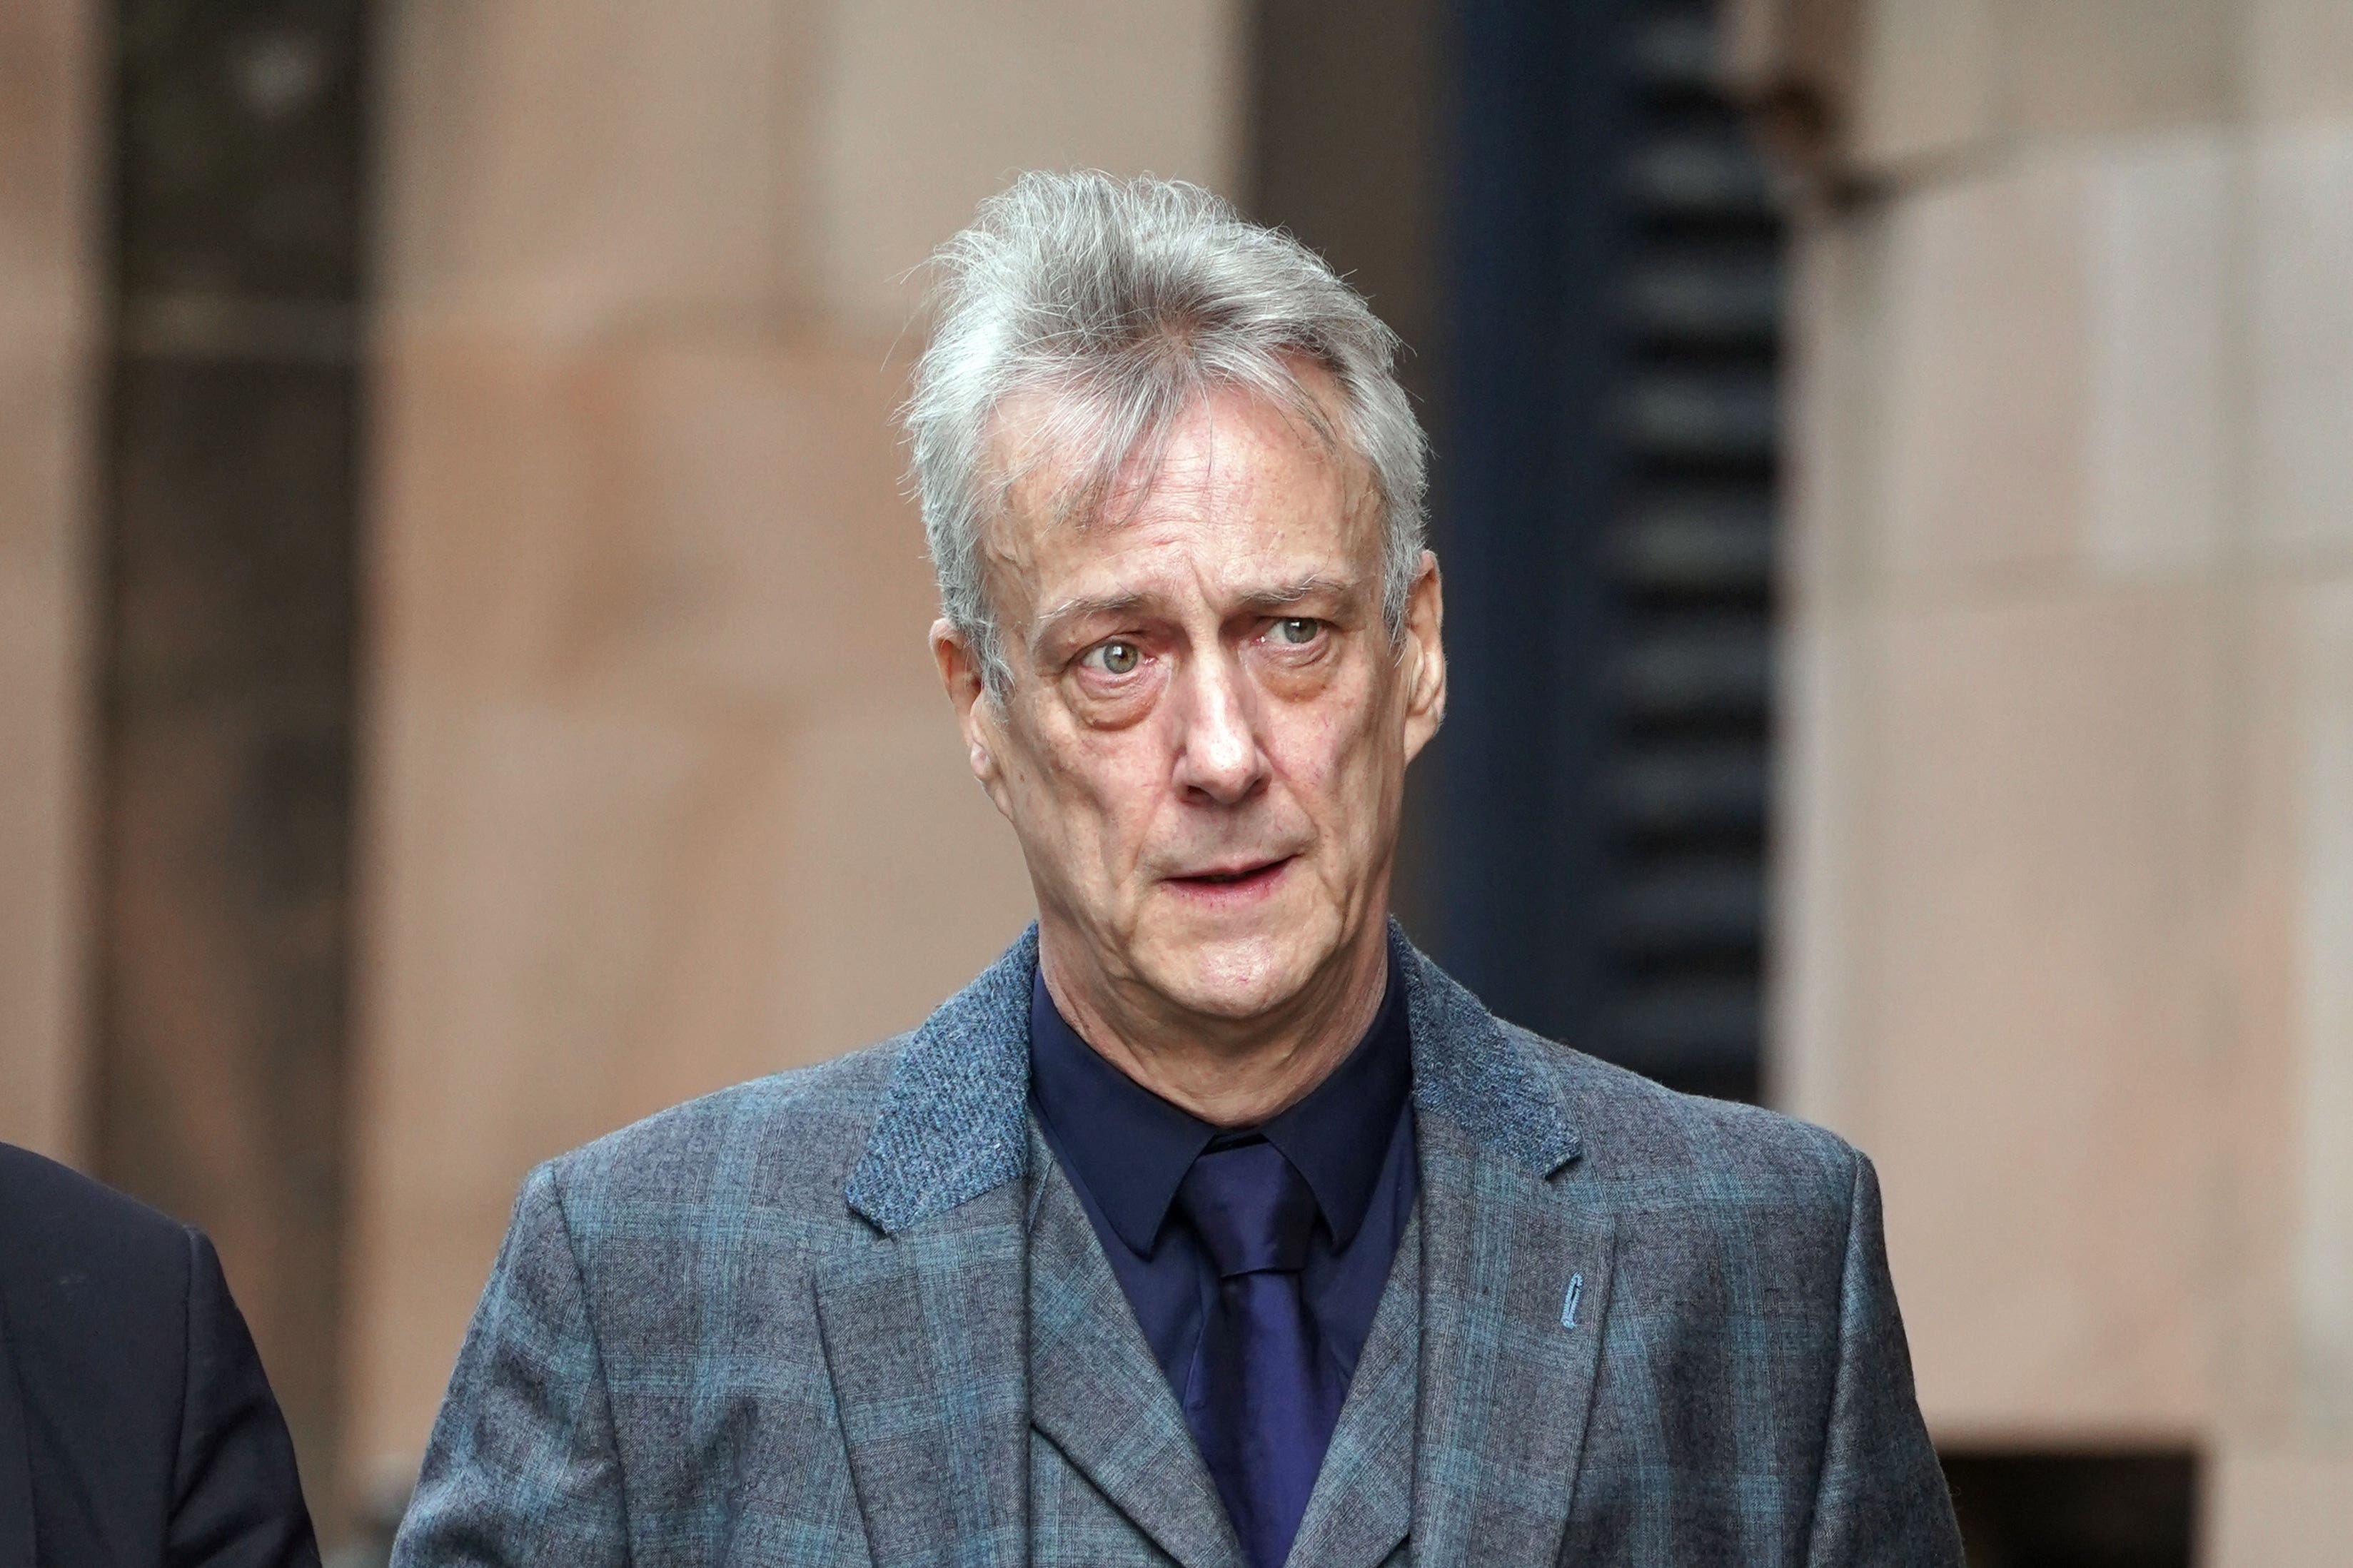 Actor Stephen Tompkinson arrives at Newcastle Crown Court